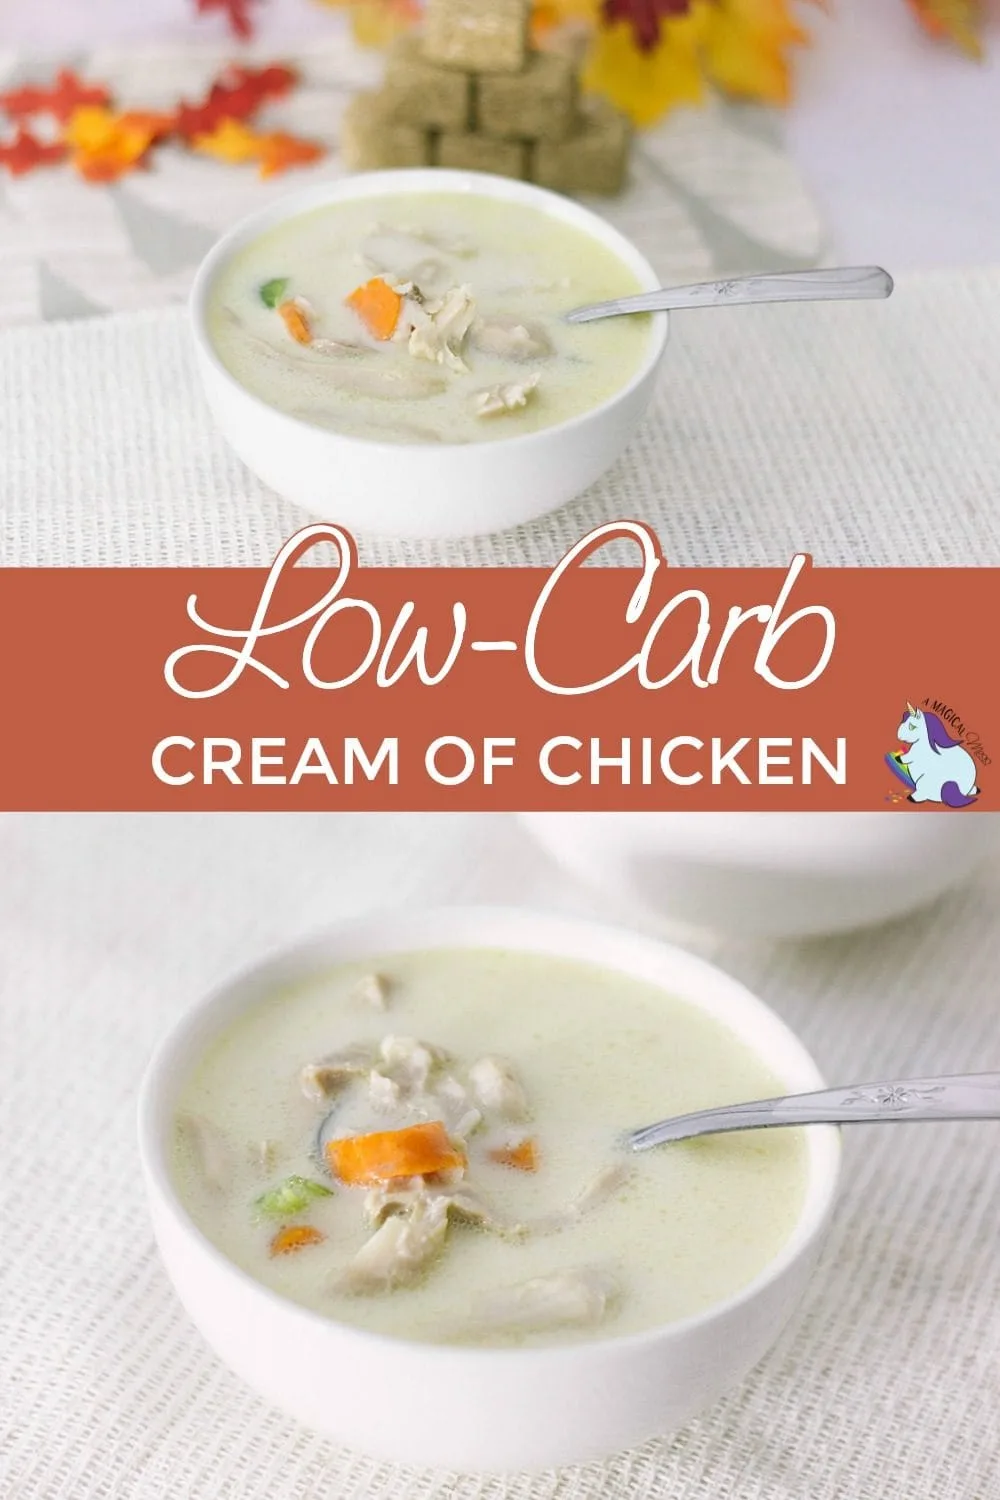 Cream of chicken soup with carrots in a bowl